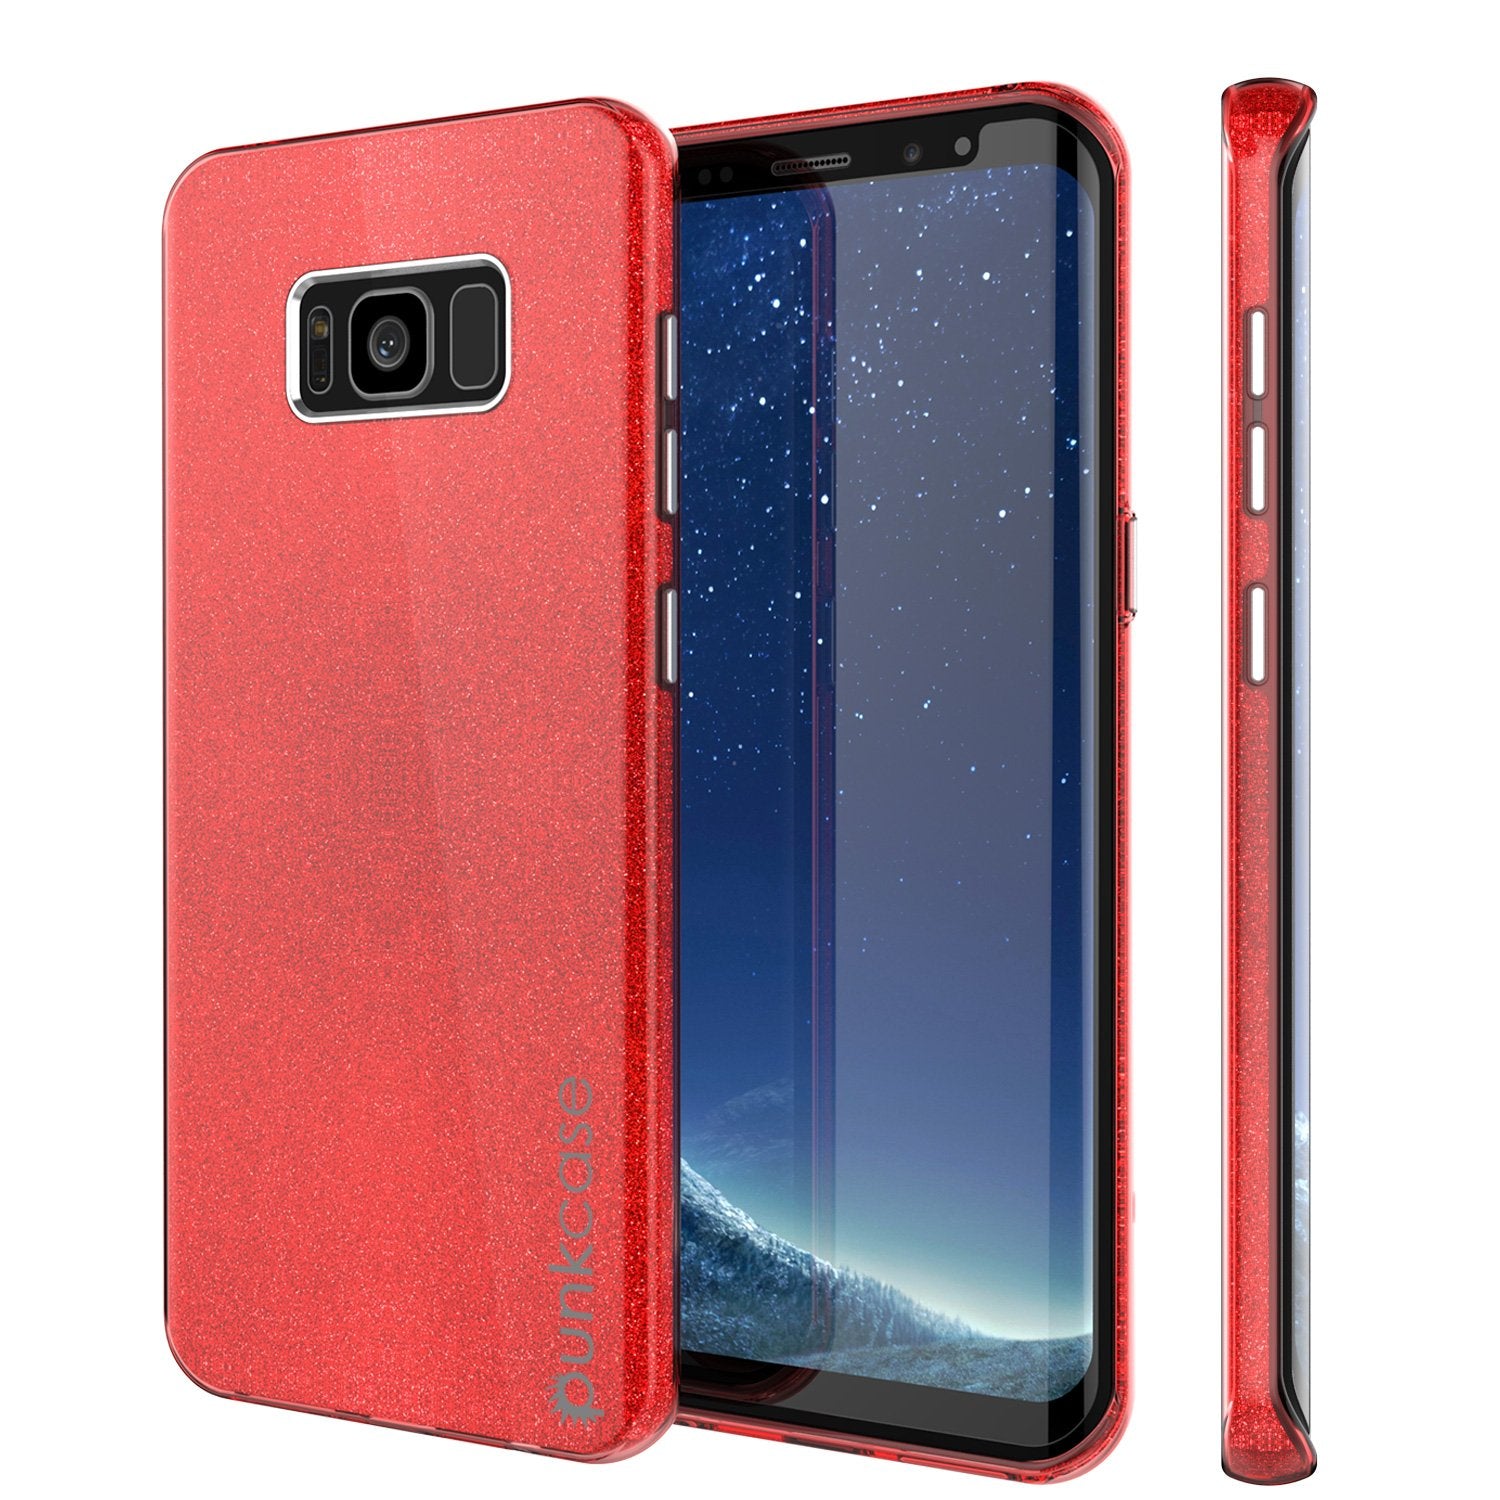 Galaxy S8 Case, Punkcase Galactic 2.0 Series Ultra Slim Protective Armor TPU Cover w/ PunkShield Screen Protector | Lifetime Exchange Warranty | Designed for Samsung Galaxy S8 [Red]